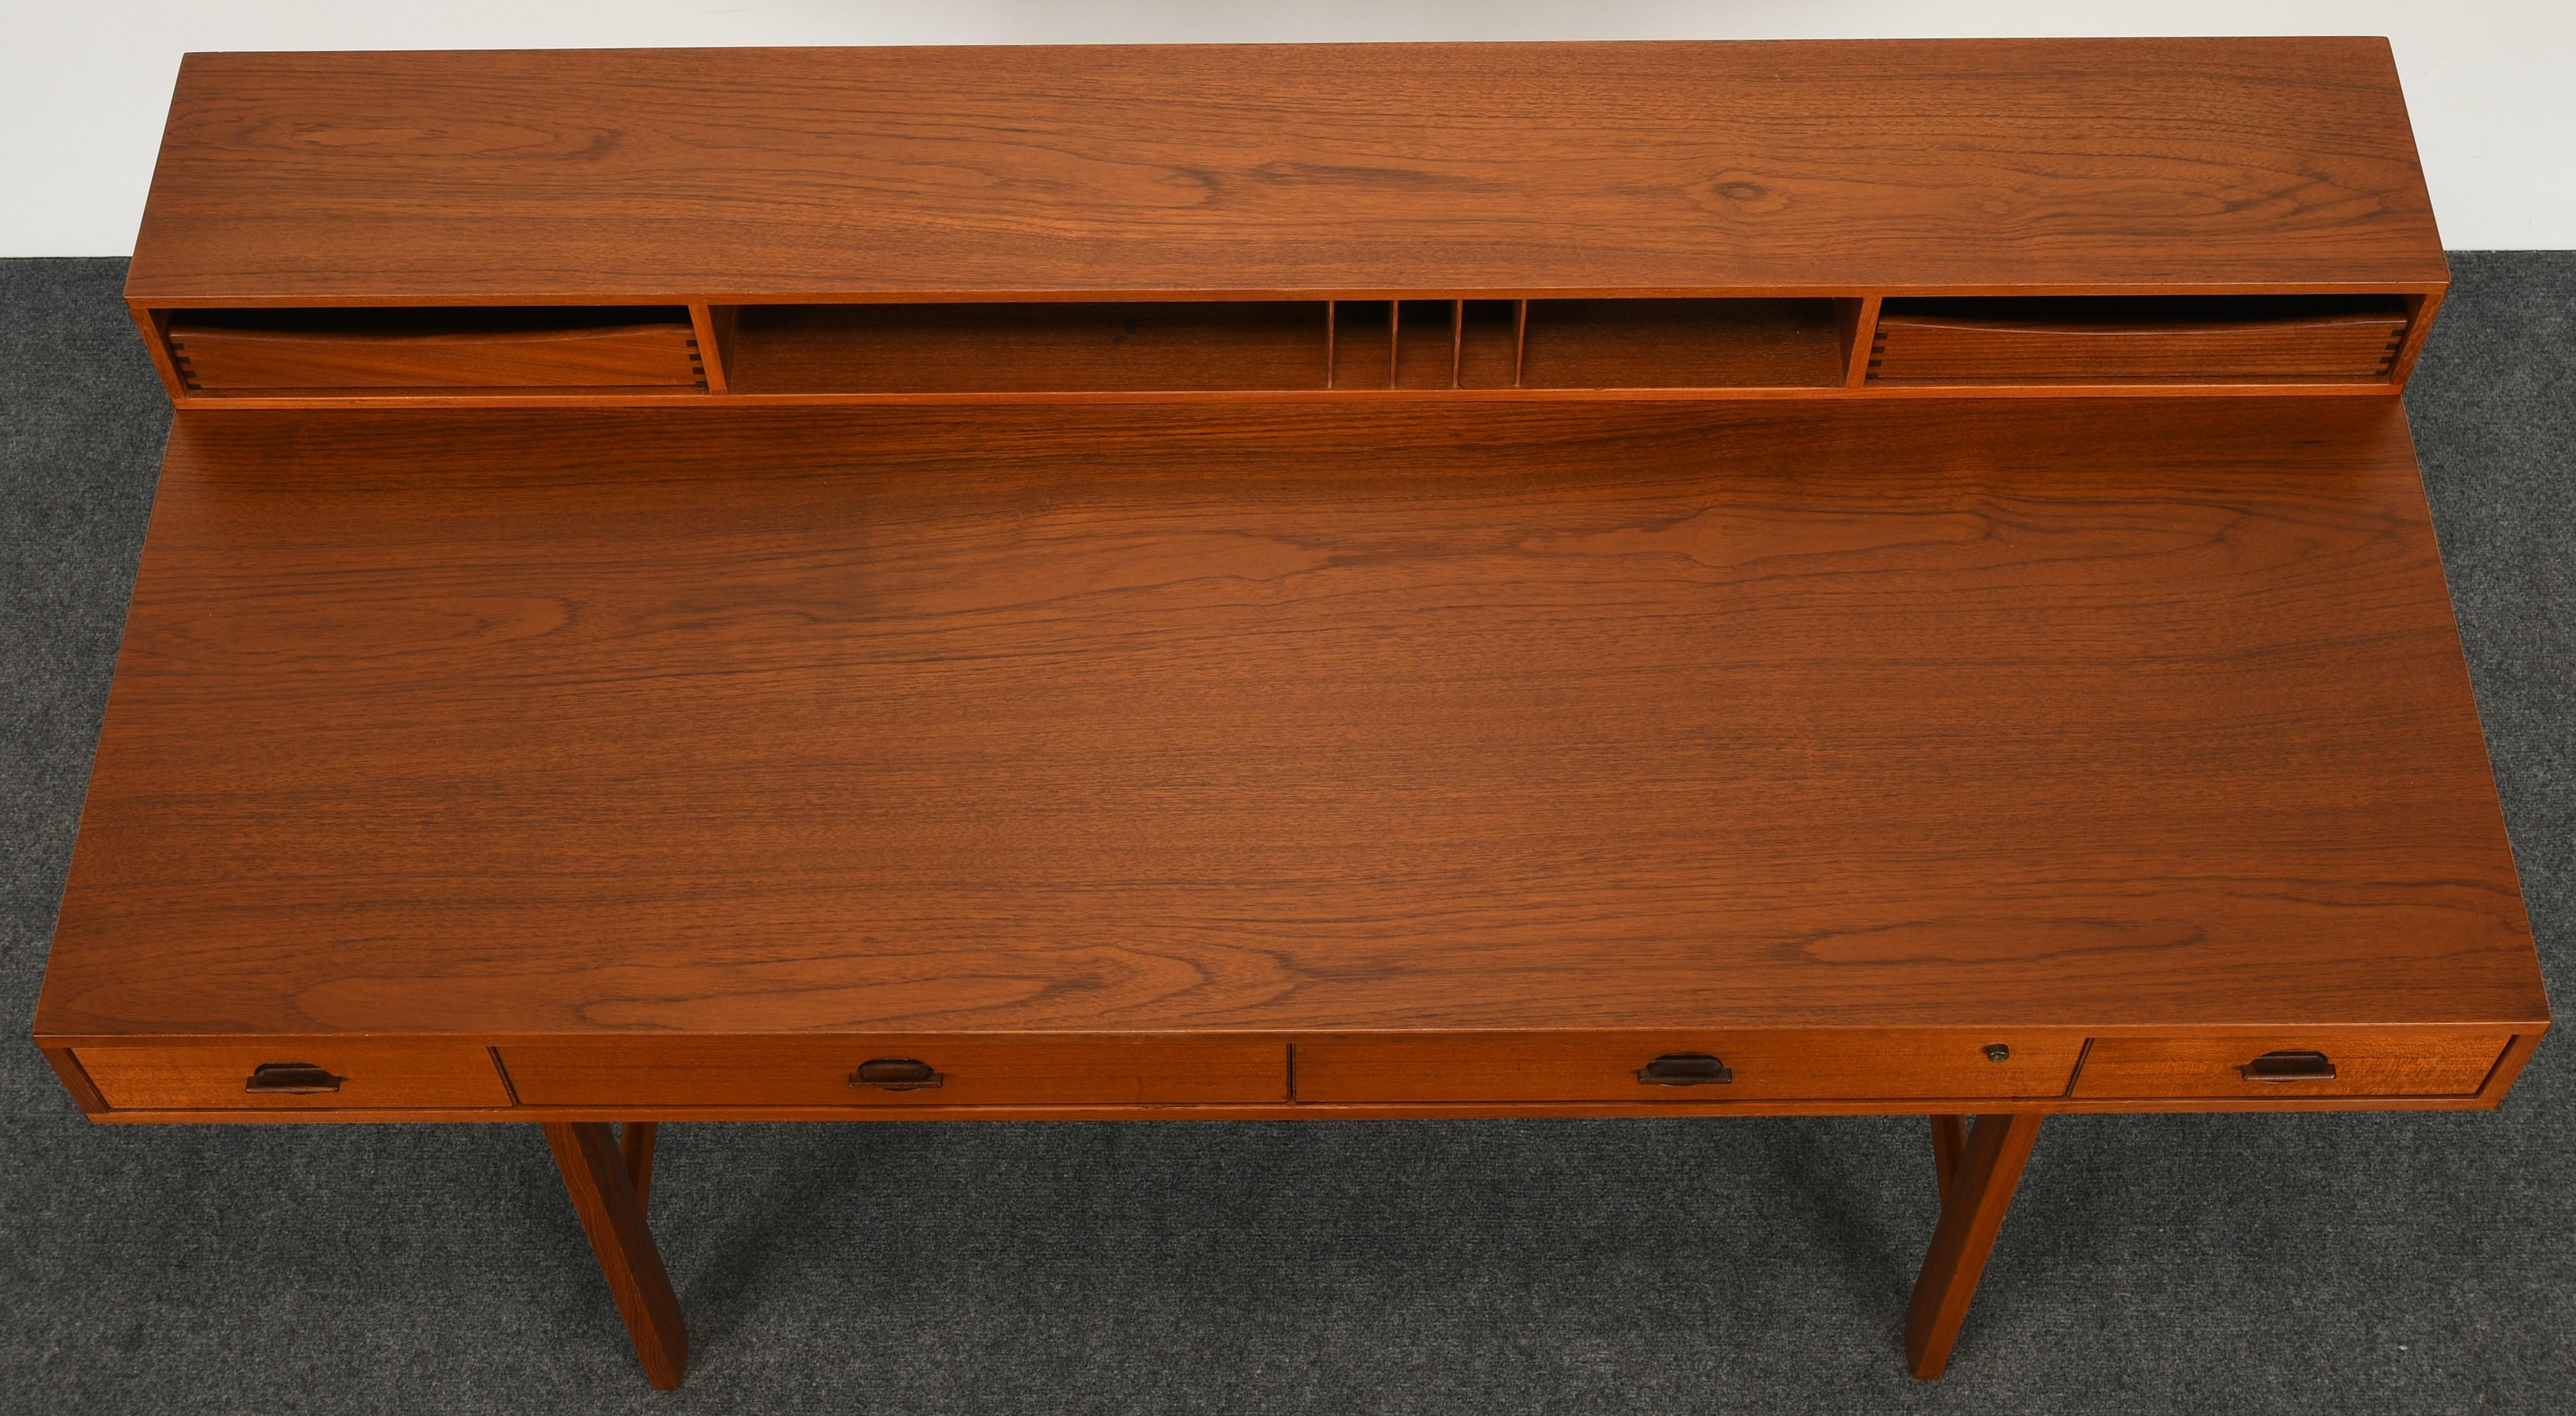 A beautiful expandable Danish modern teak partners desk with a flip-top design by Jens Quistgaard for Peter Lovig Nielsen. This desk can be used either flipped down for expansive space or flipped up for ample storage. Solid teak construction with a